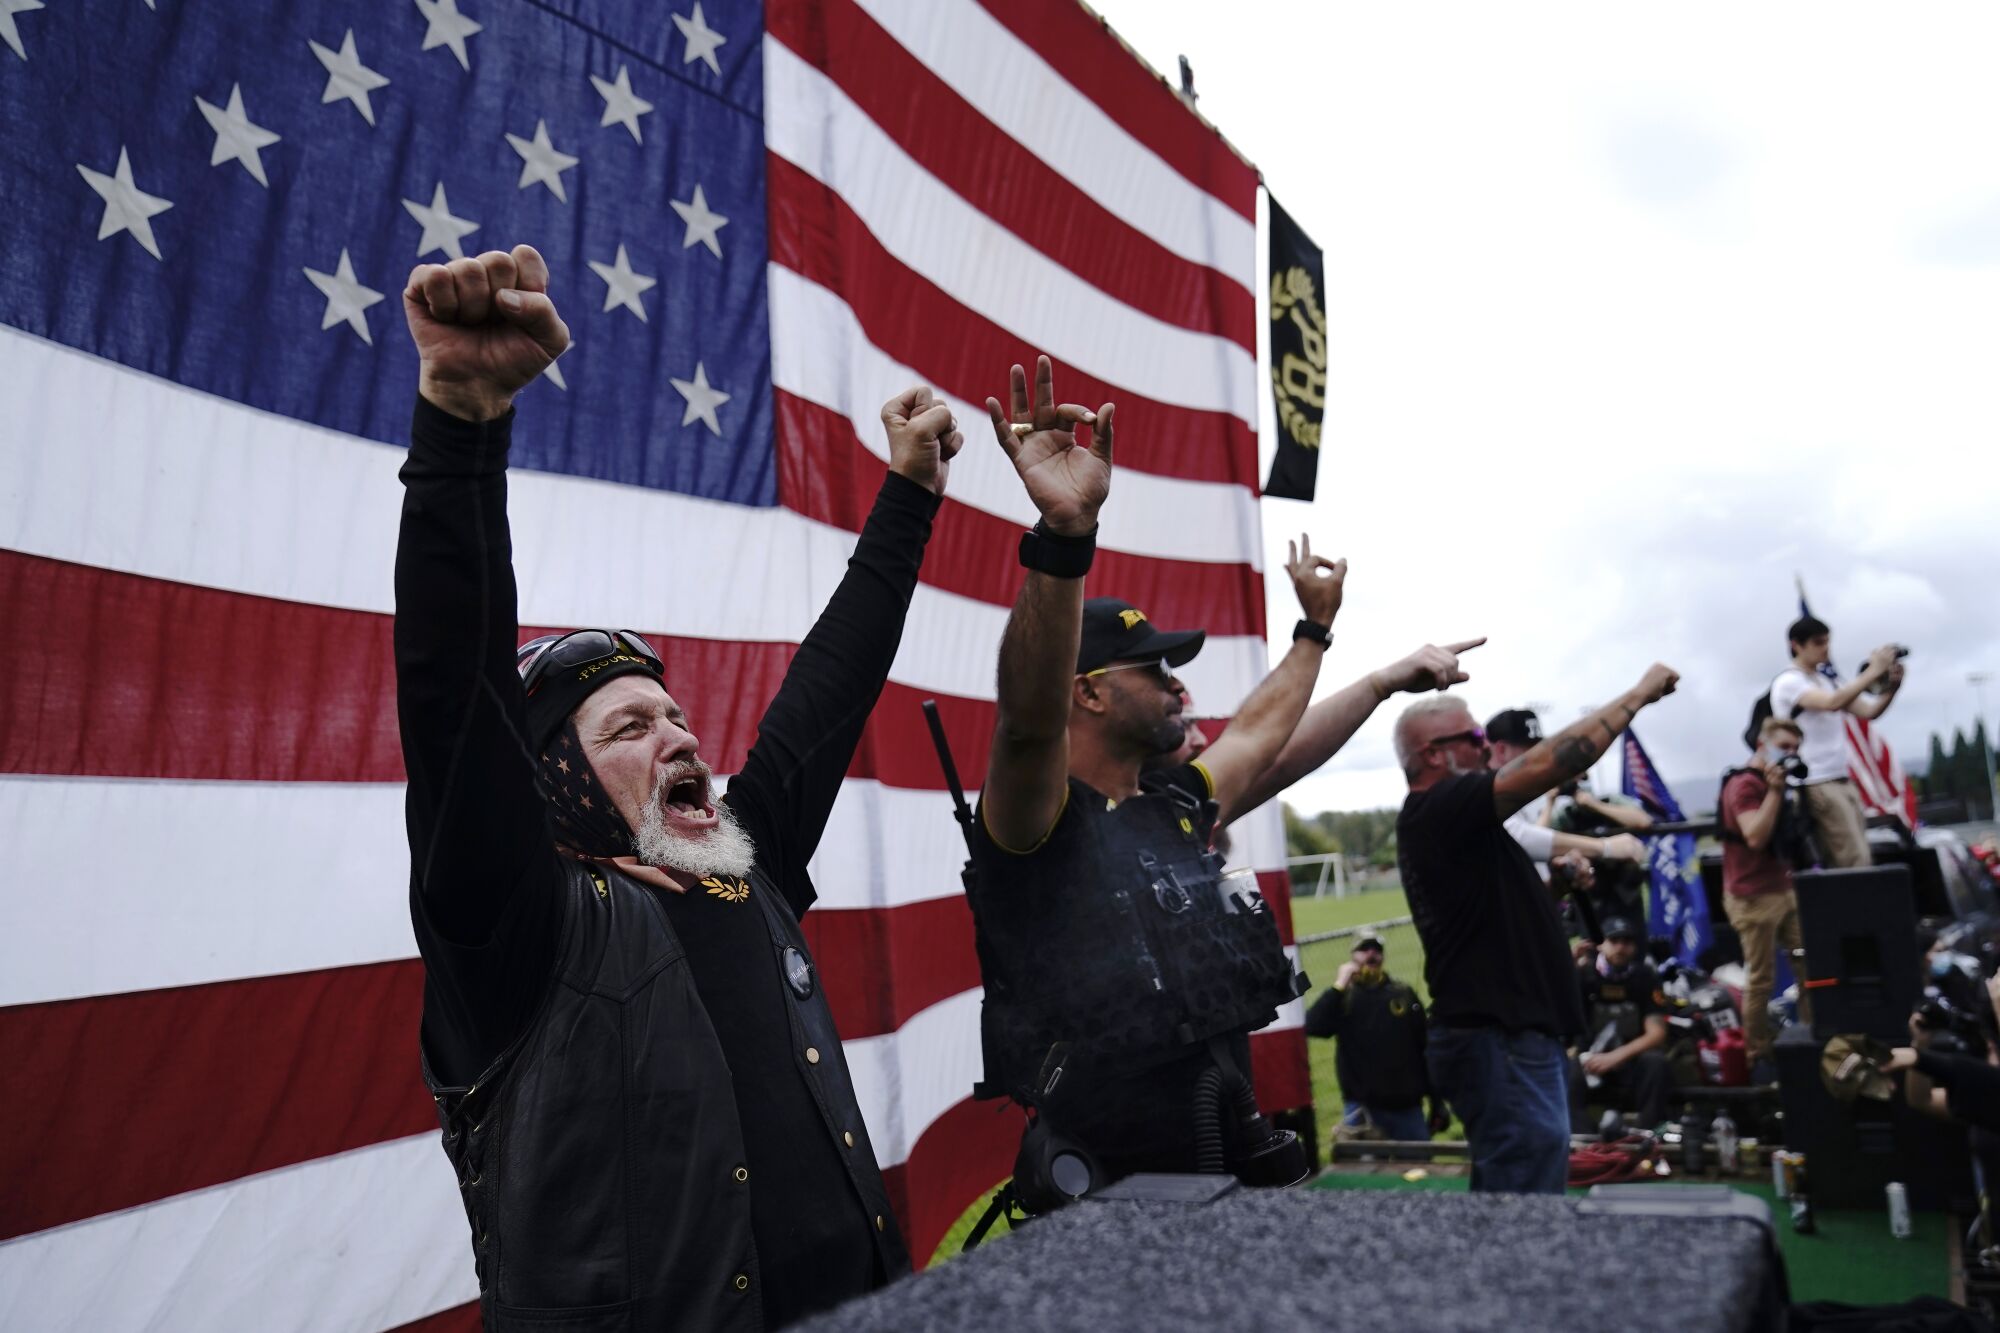 Proud Boys members raise their arms in front of a large U.S. flag at a demonstration